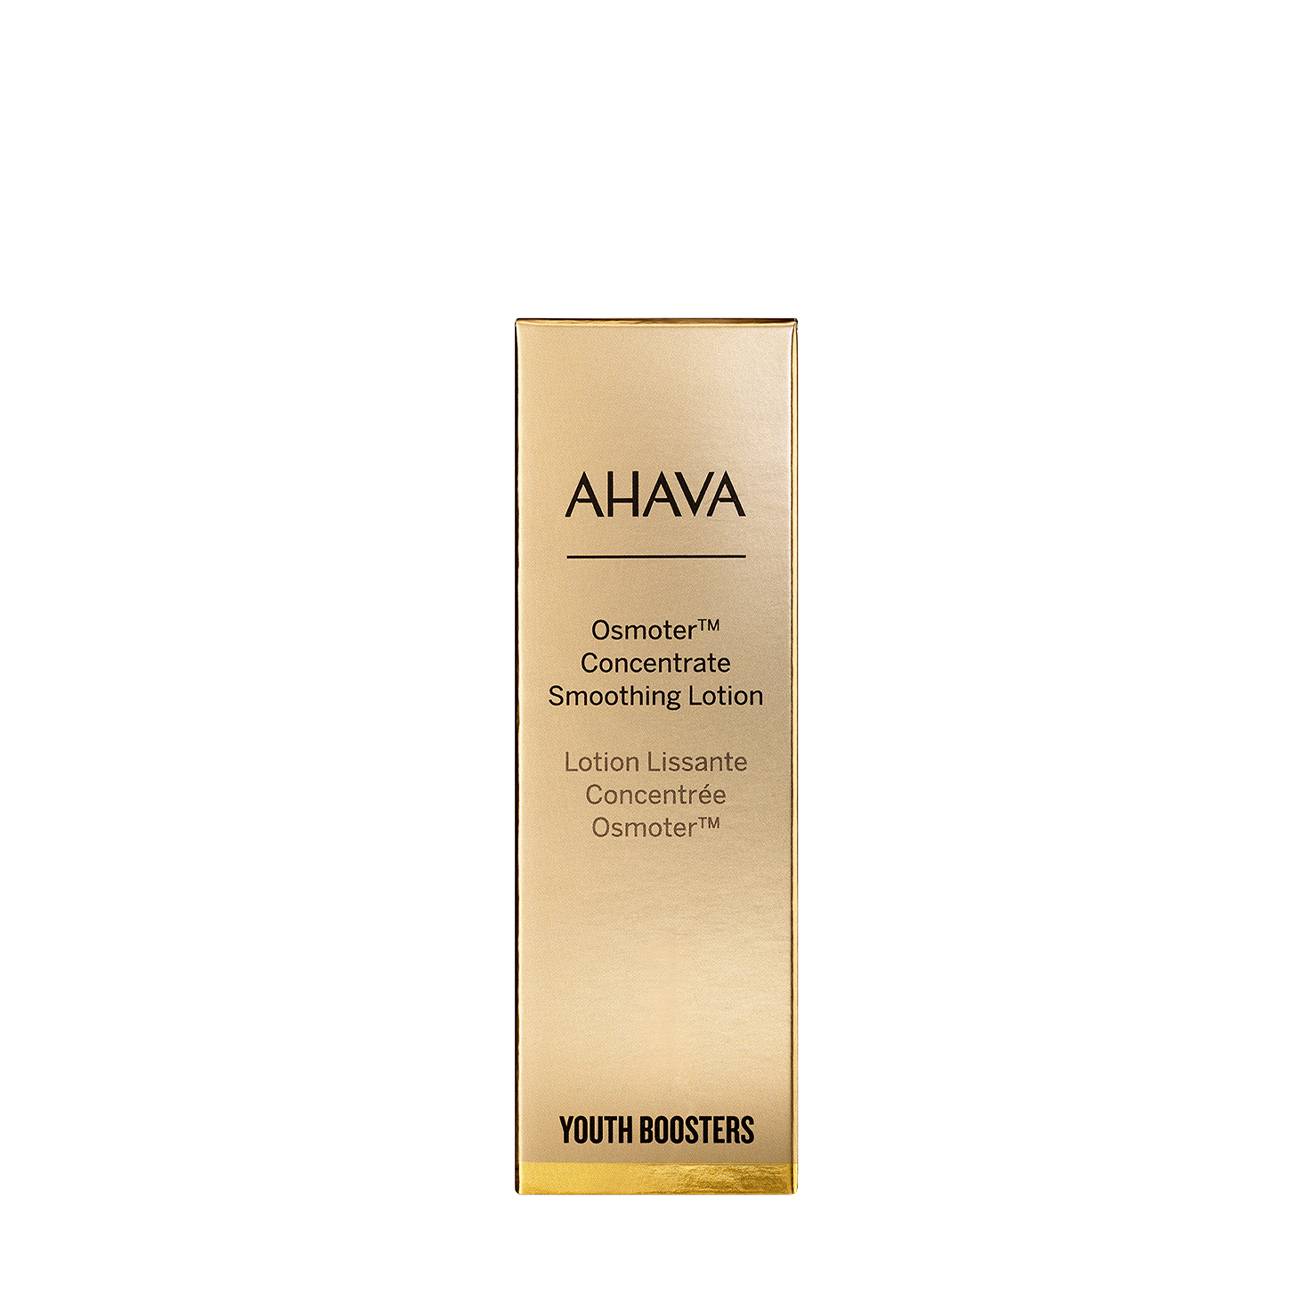 Dead Sea Osmoter™ Concentrate Smoothing Lotion 50 ml Ahava